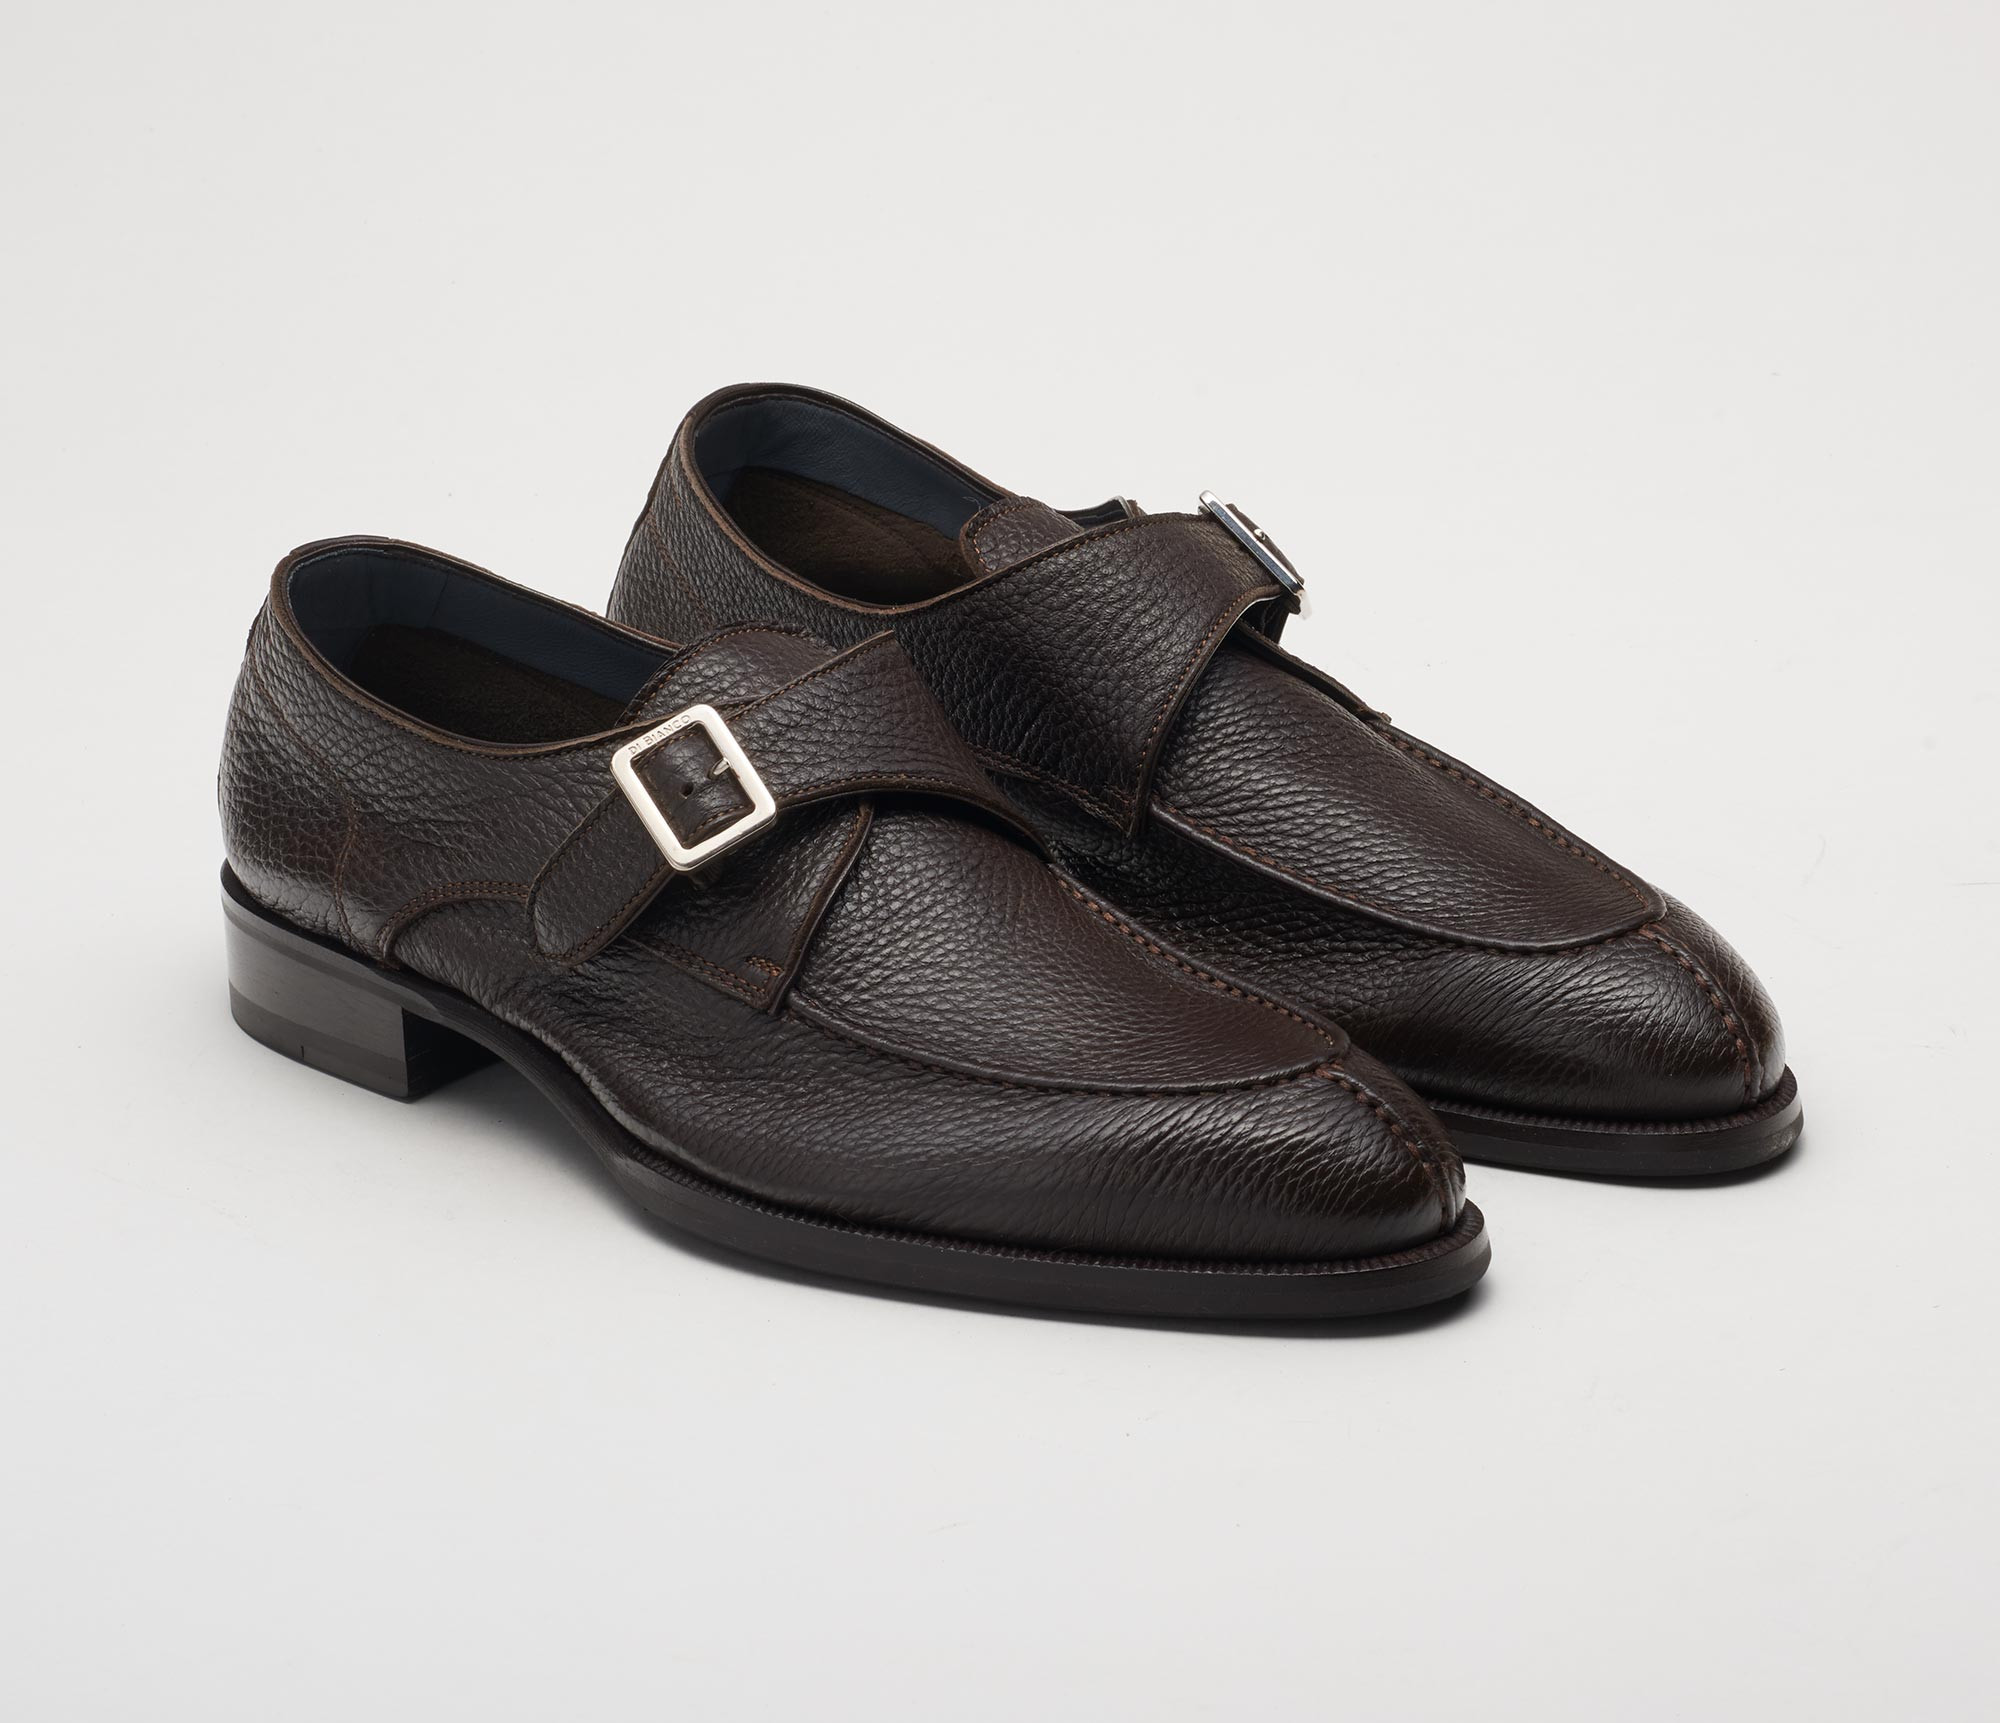 The Treviso T-Moro Monk Strap Shoes - 8